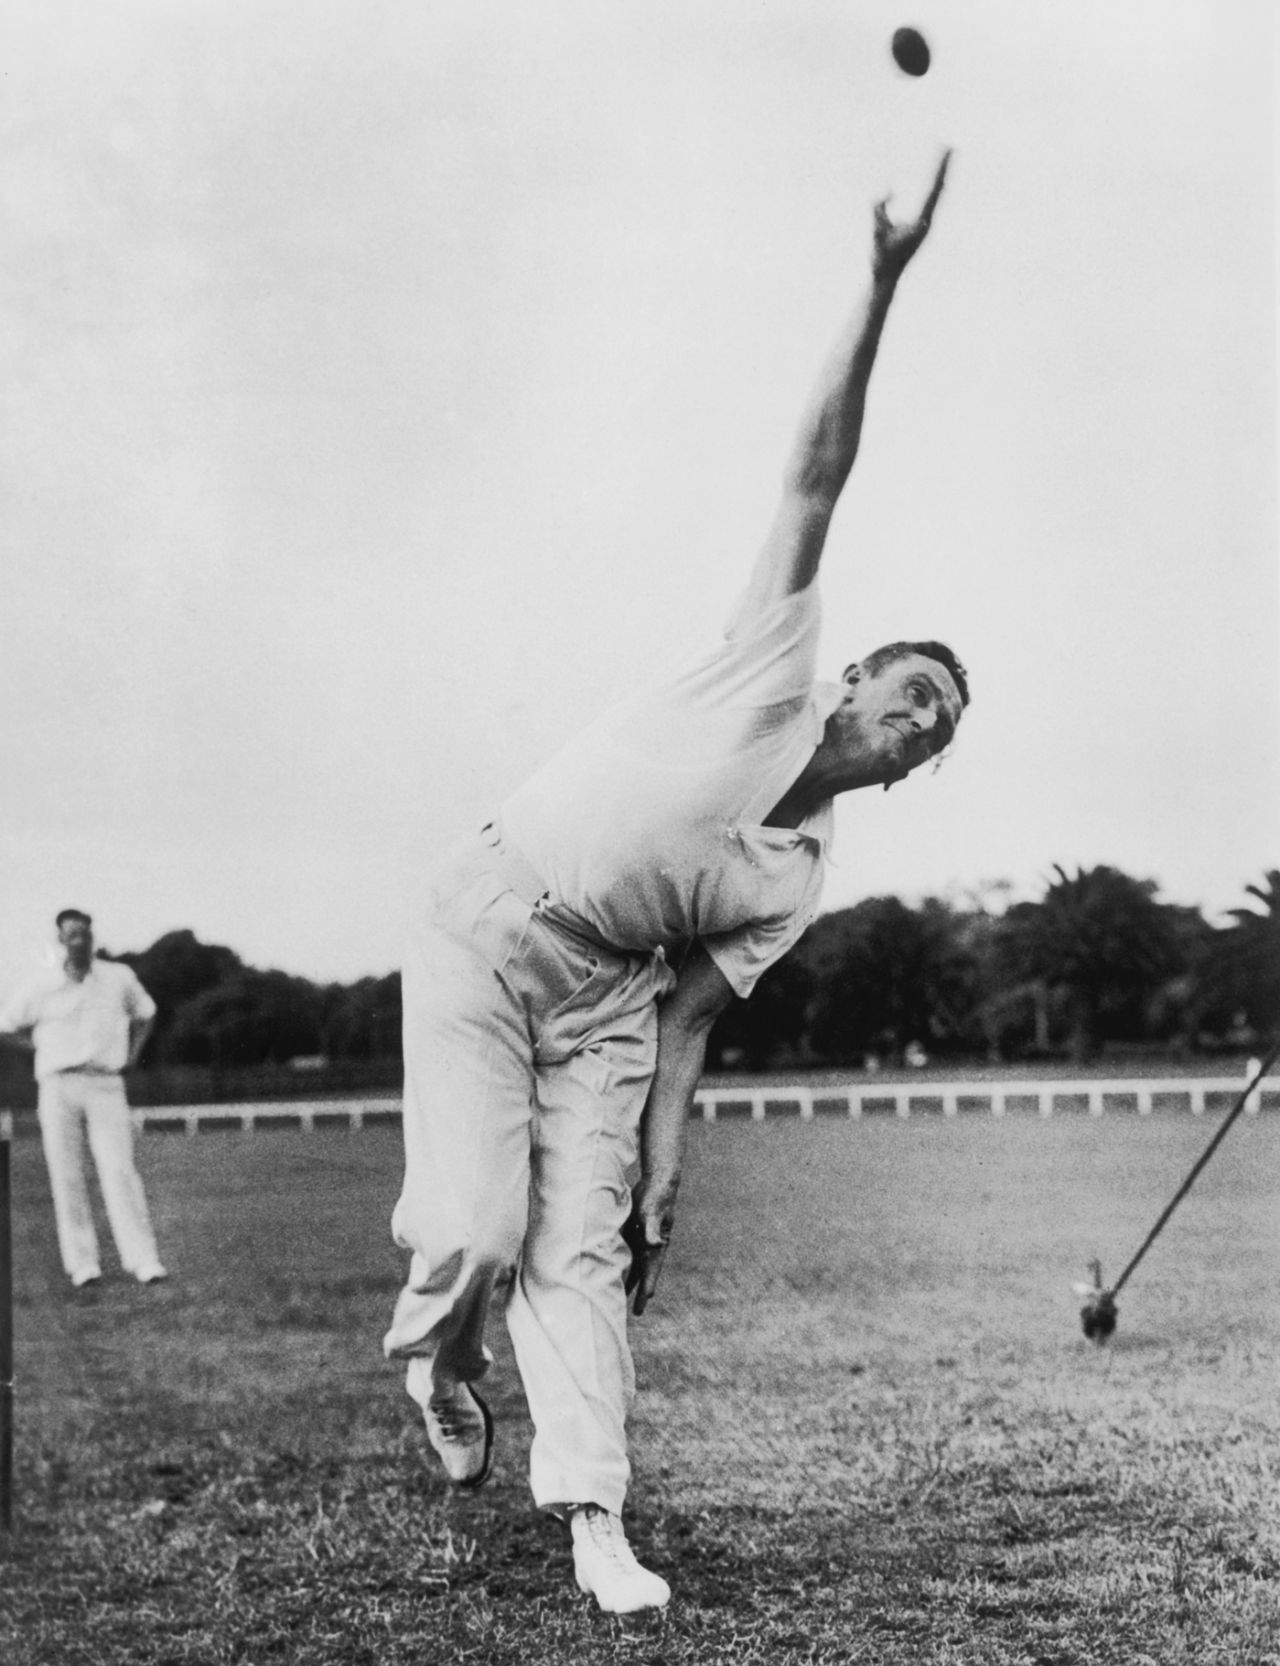 Jack Iverson bowls ahead of his Test debut, October 23, 1950